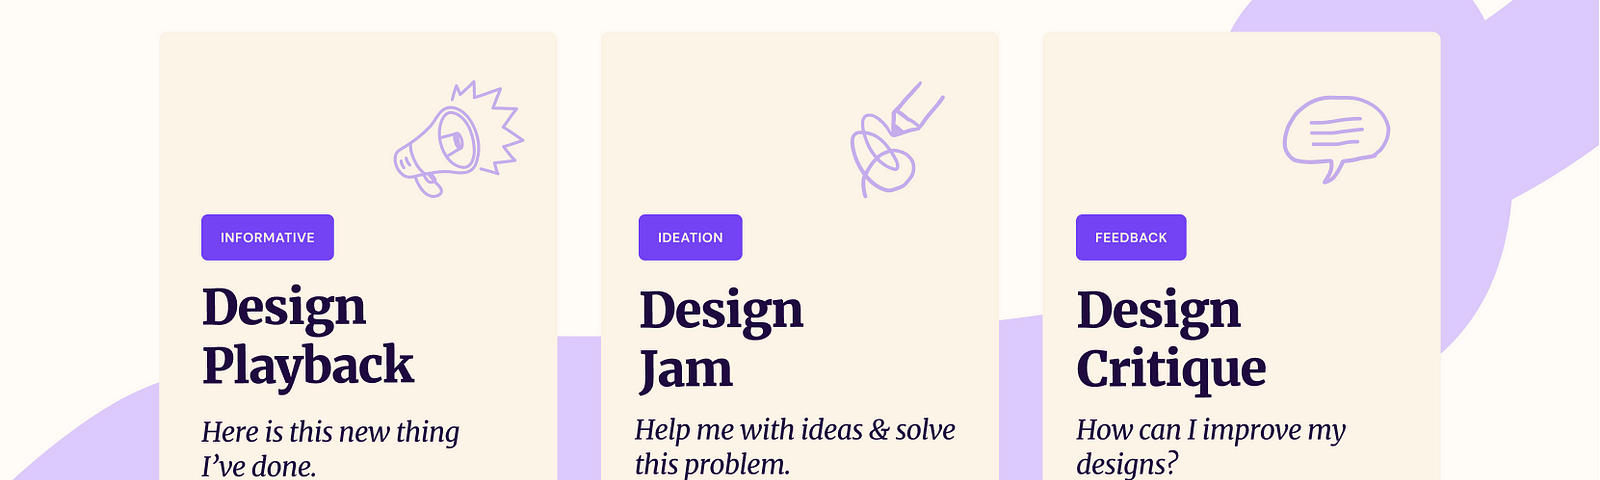 Image with three options: Design Playback [Informative] with speakerphone icon, Design Jam [Ideation] with Scribble icon and Design Critique [Feedback] with speech bubble icon.